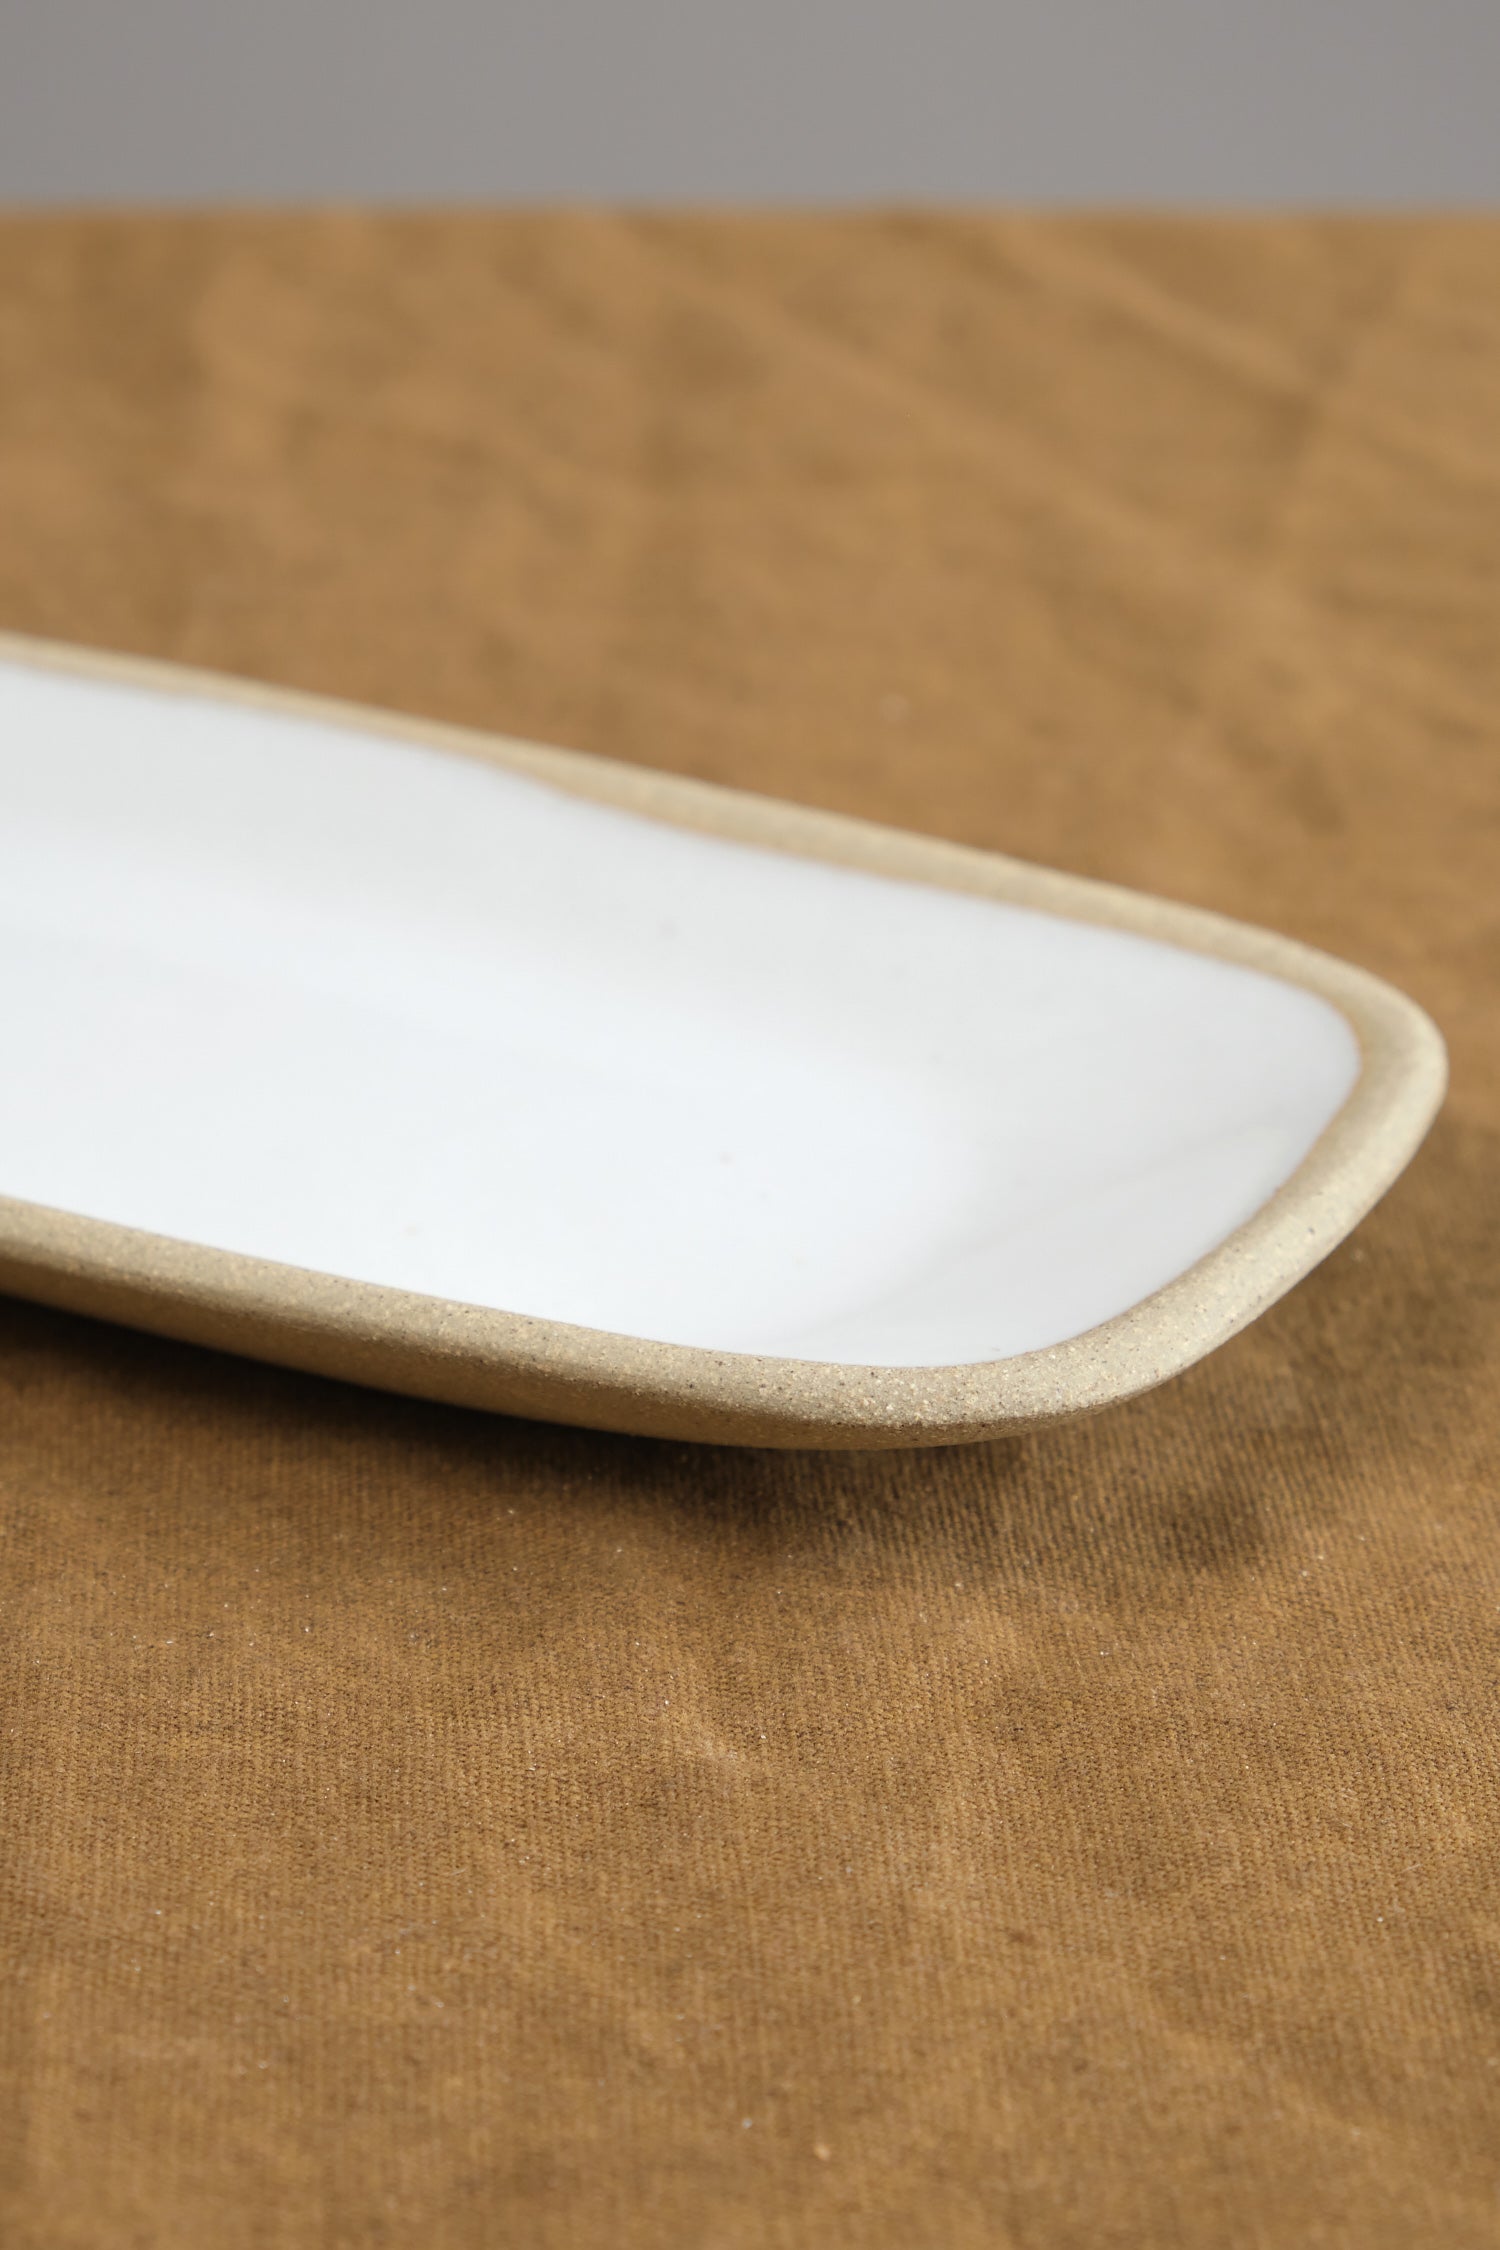 Edge of Small Rectangle Serving Tray